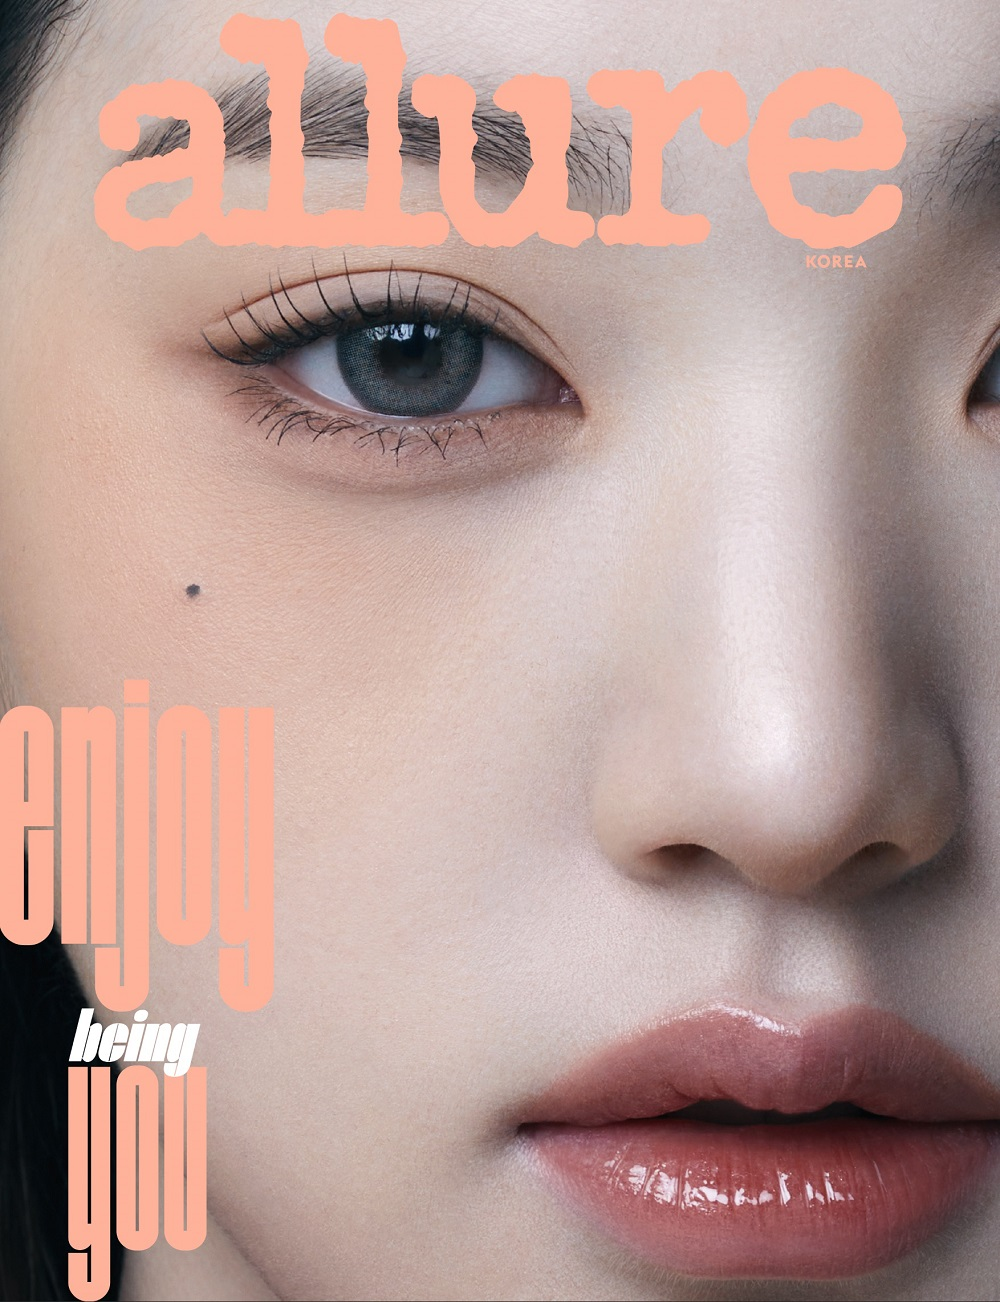 Magazine Allure May 2023 (Cover : WONYOUNG)